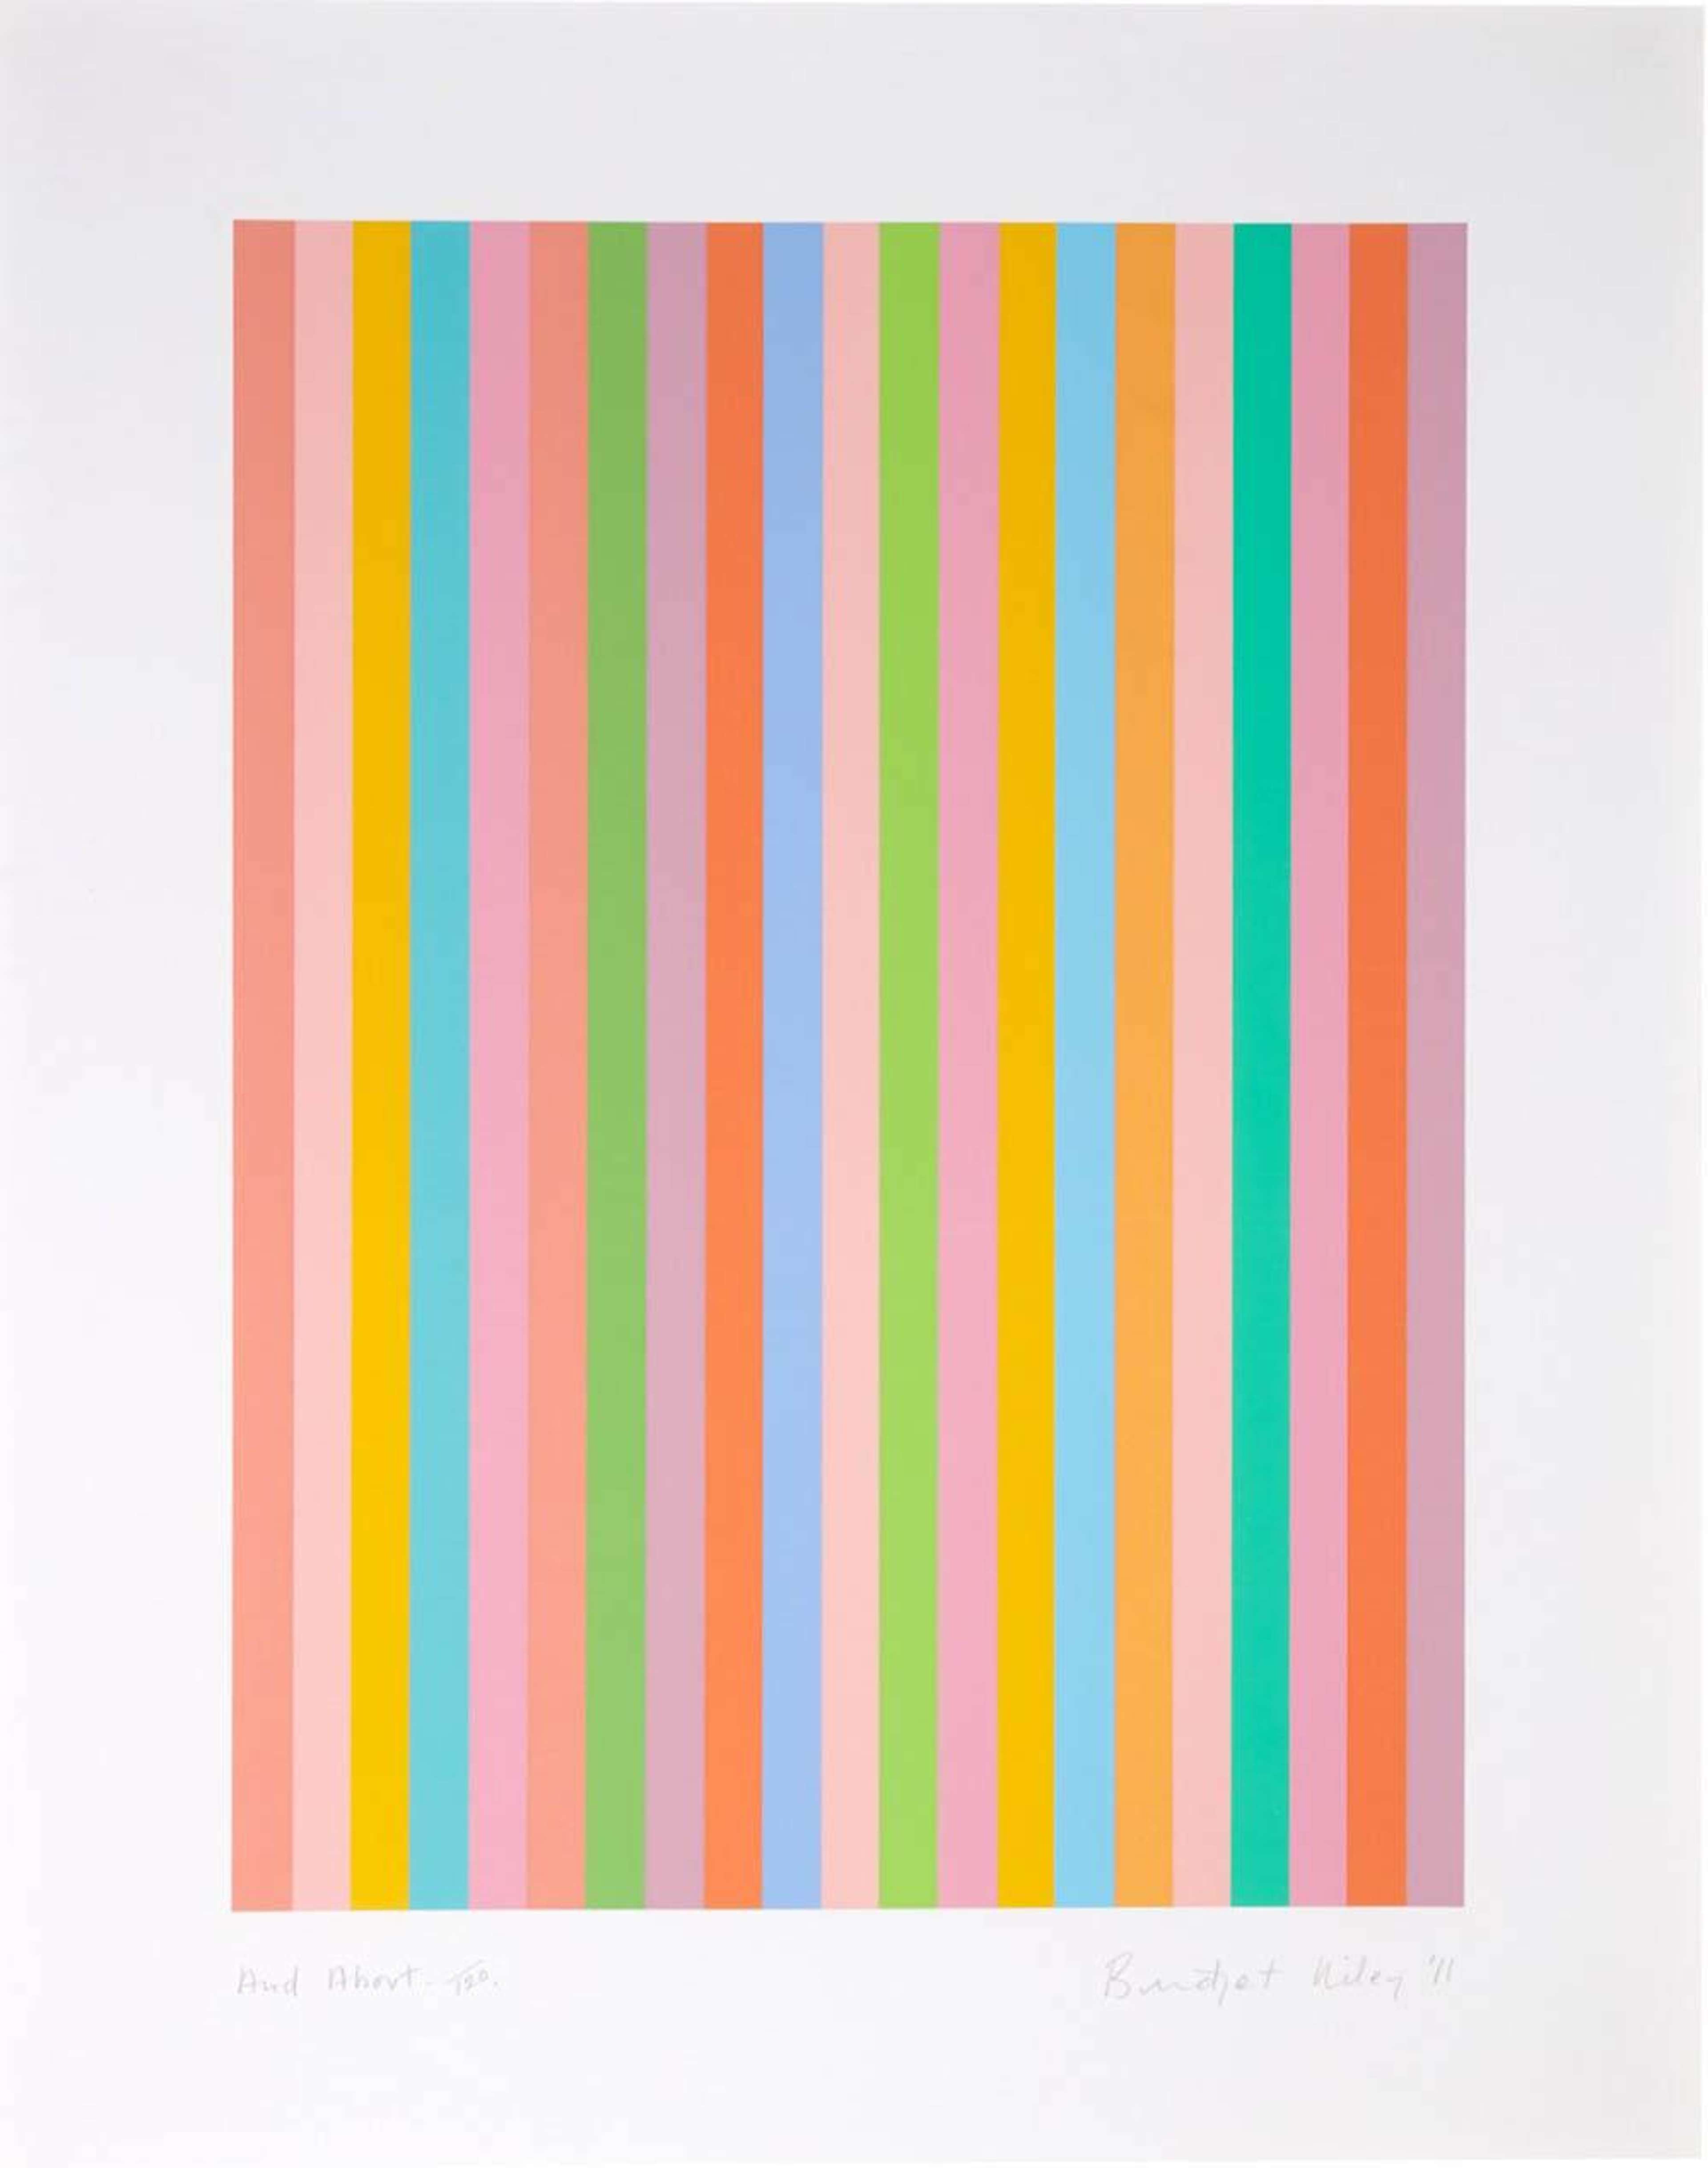 And About by Bridget Riley 